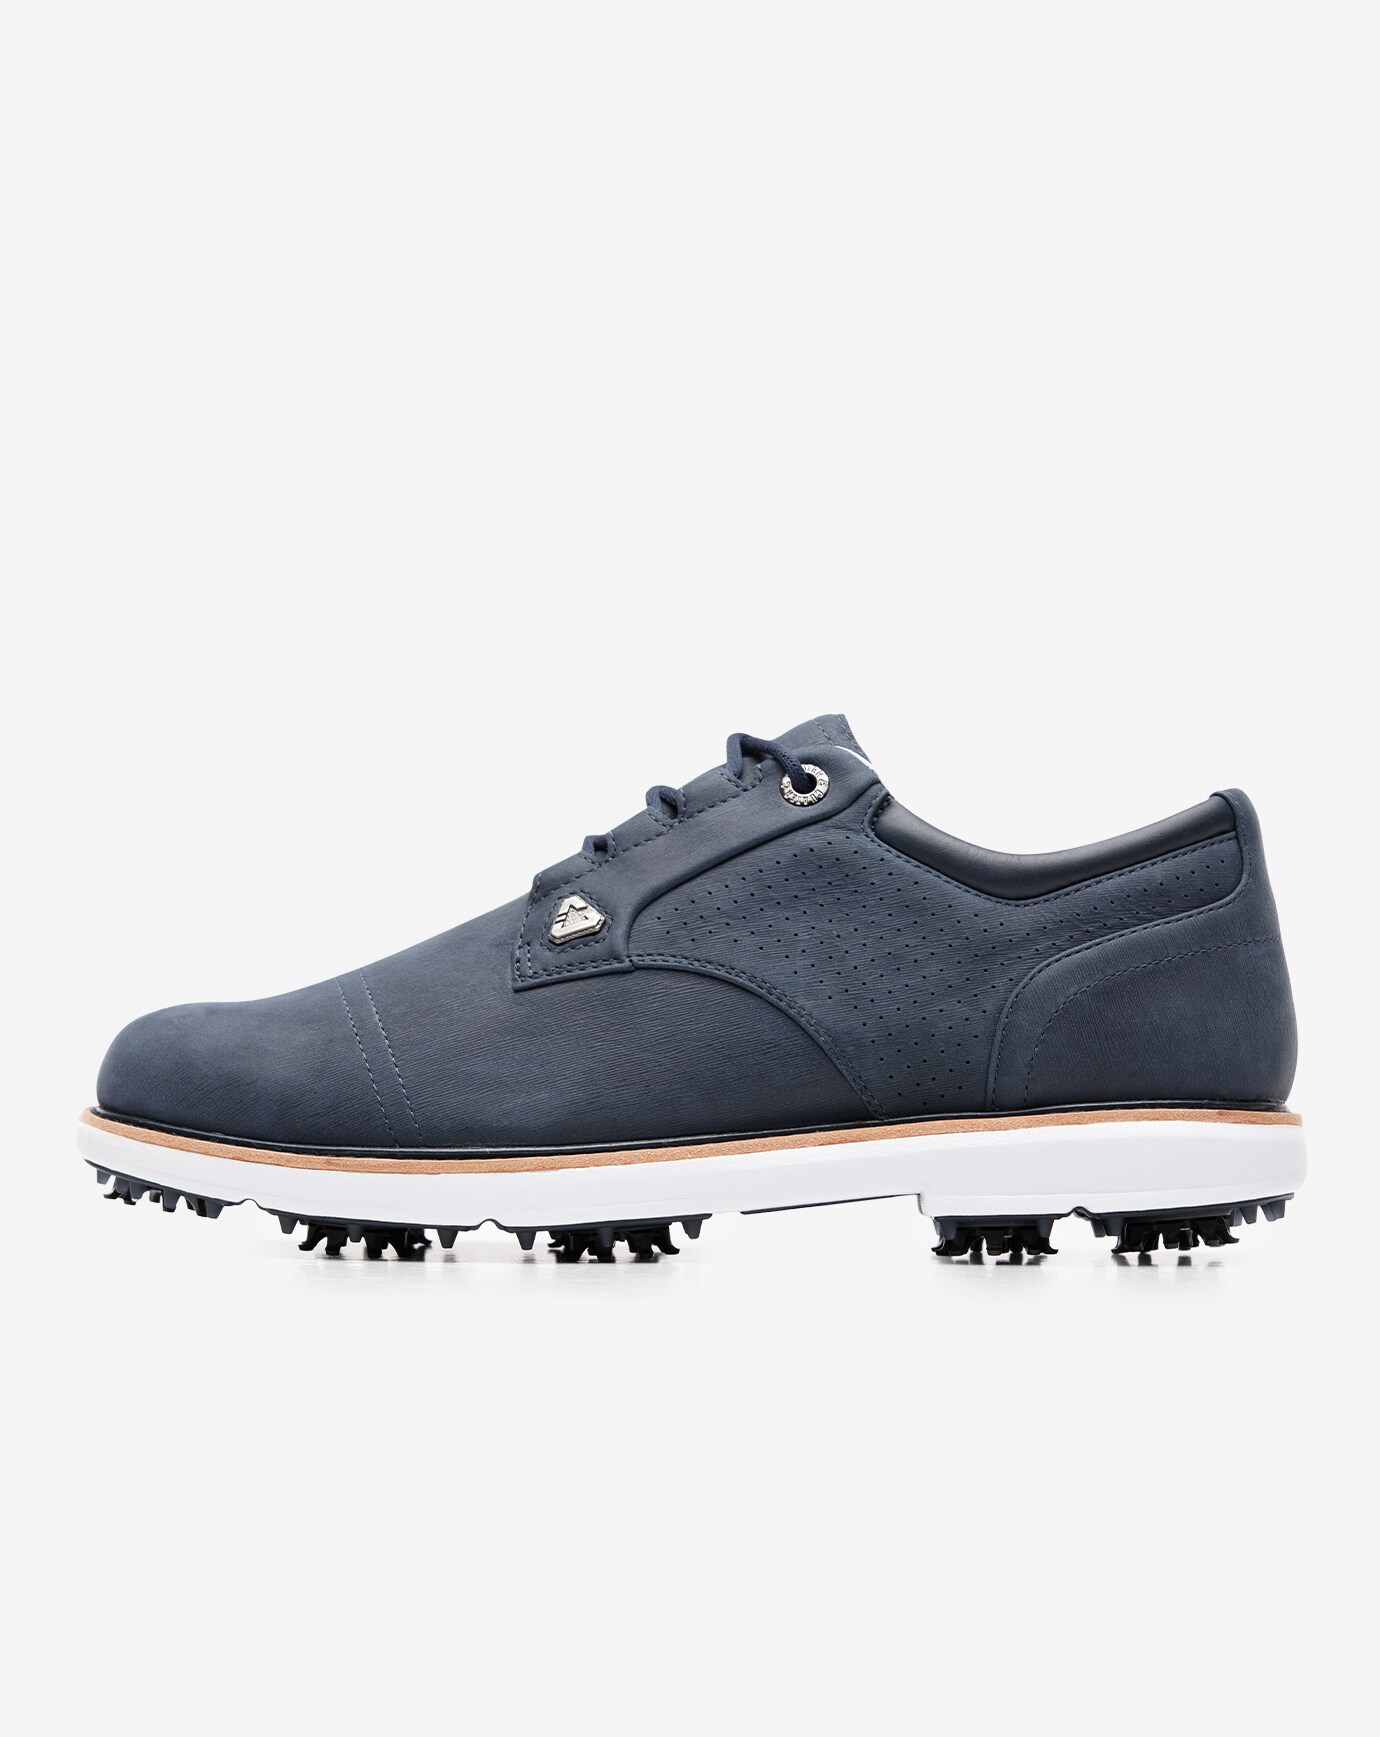 THE LEGEND SPIKED GOLF SHOE Image 1